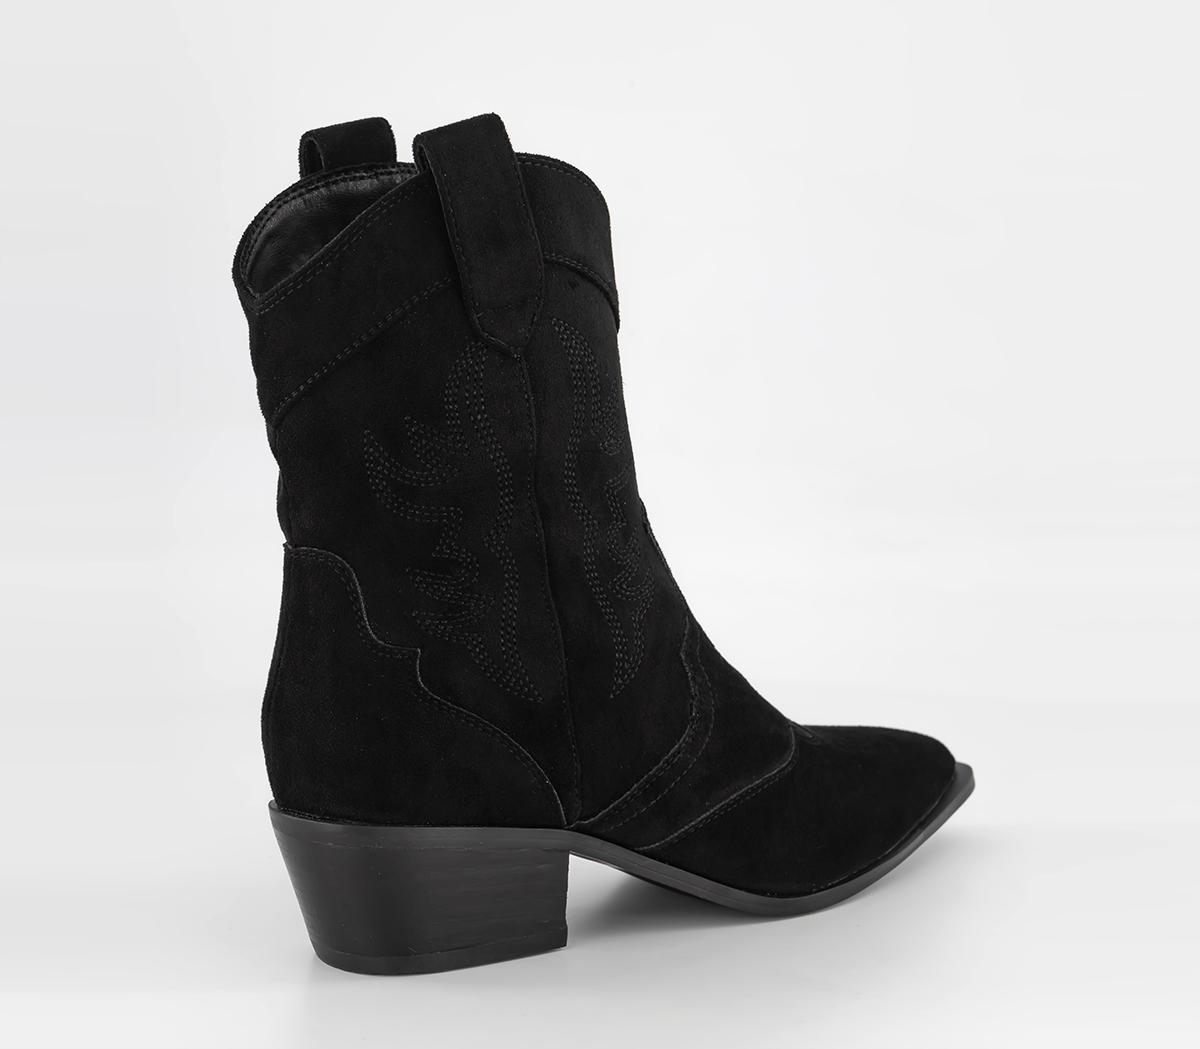 OFFICE Americana Western Ankle Boots Black Women's Ankle Boots